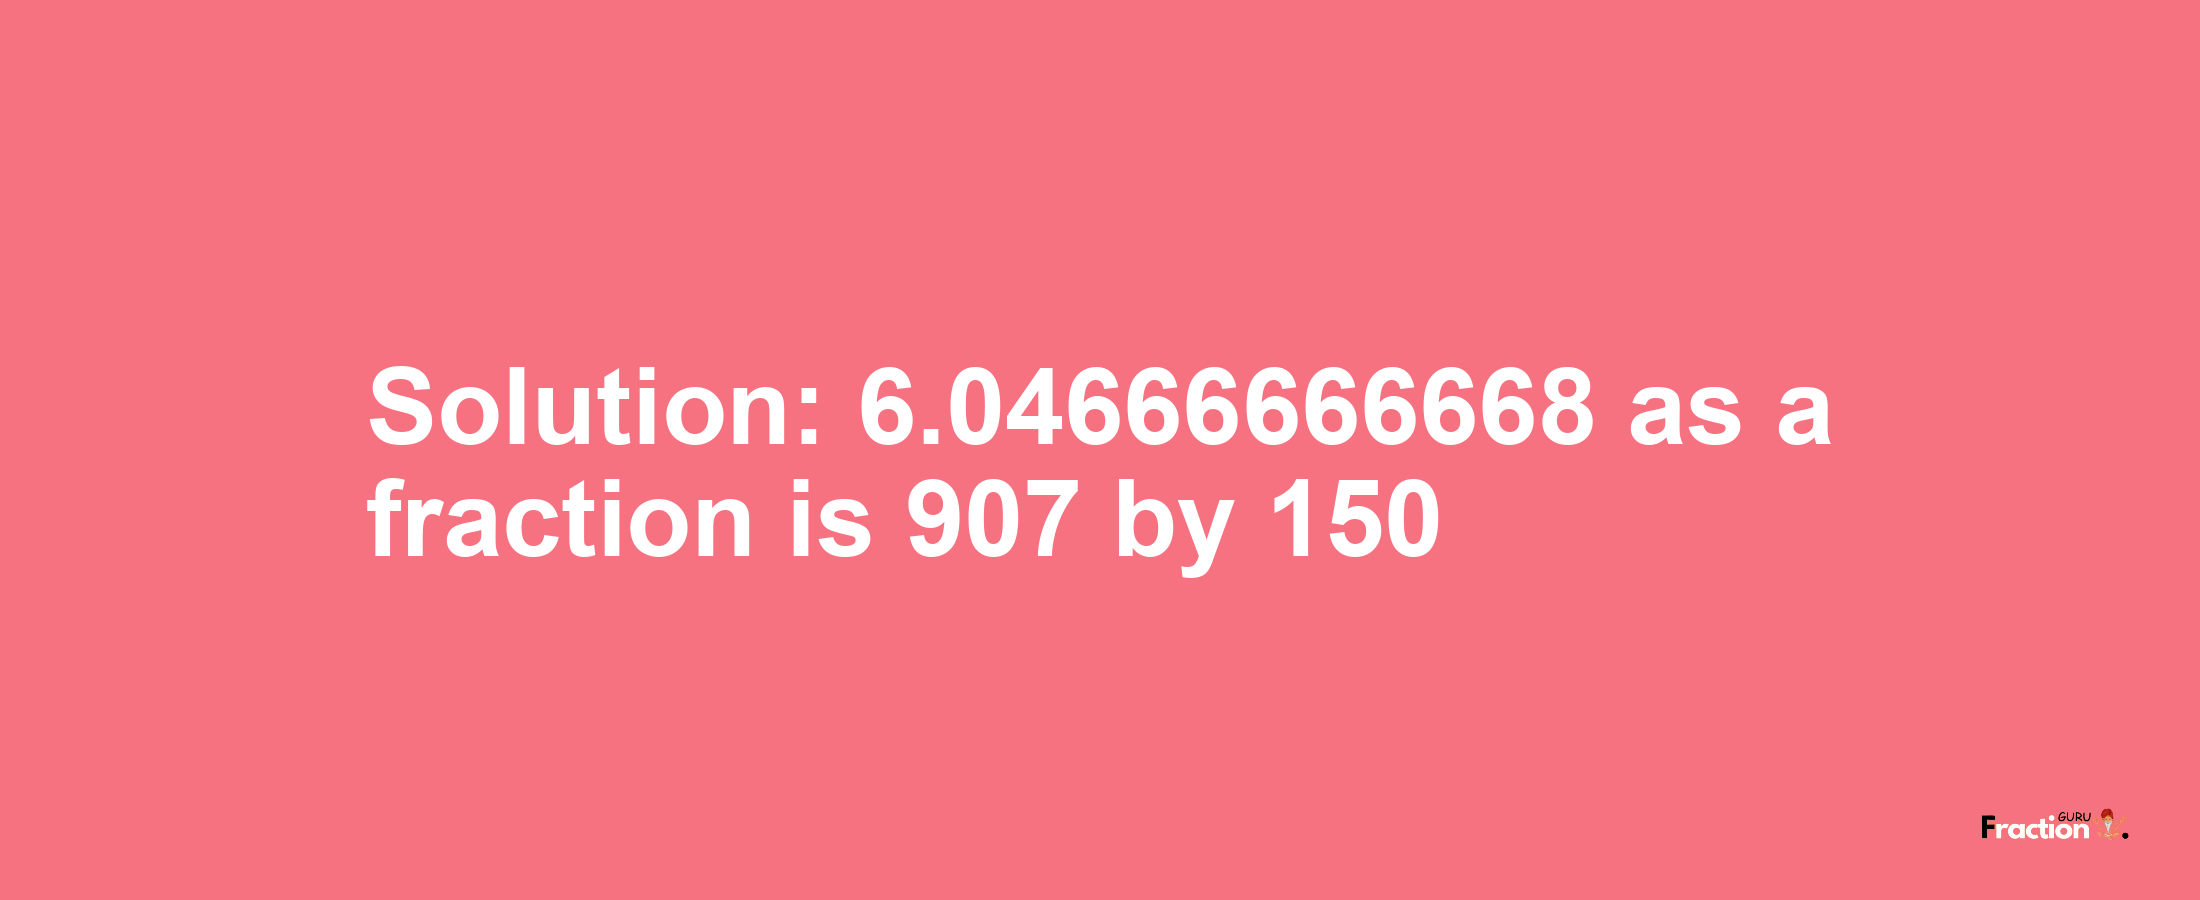 Solution:6.04666666668 as a fraction is 907/150